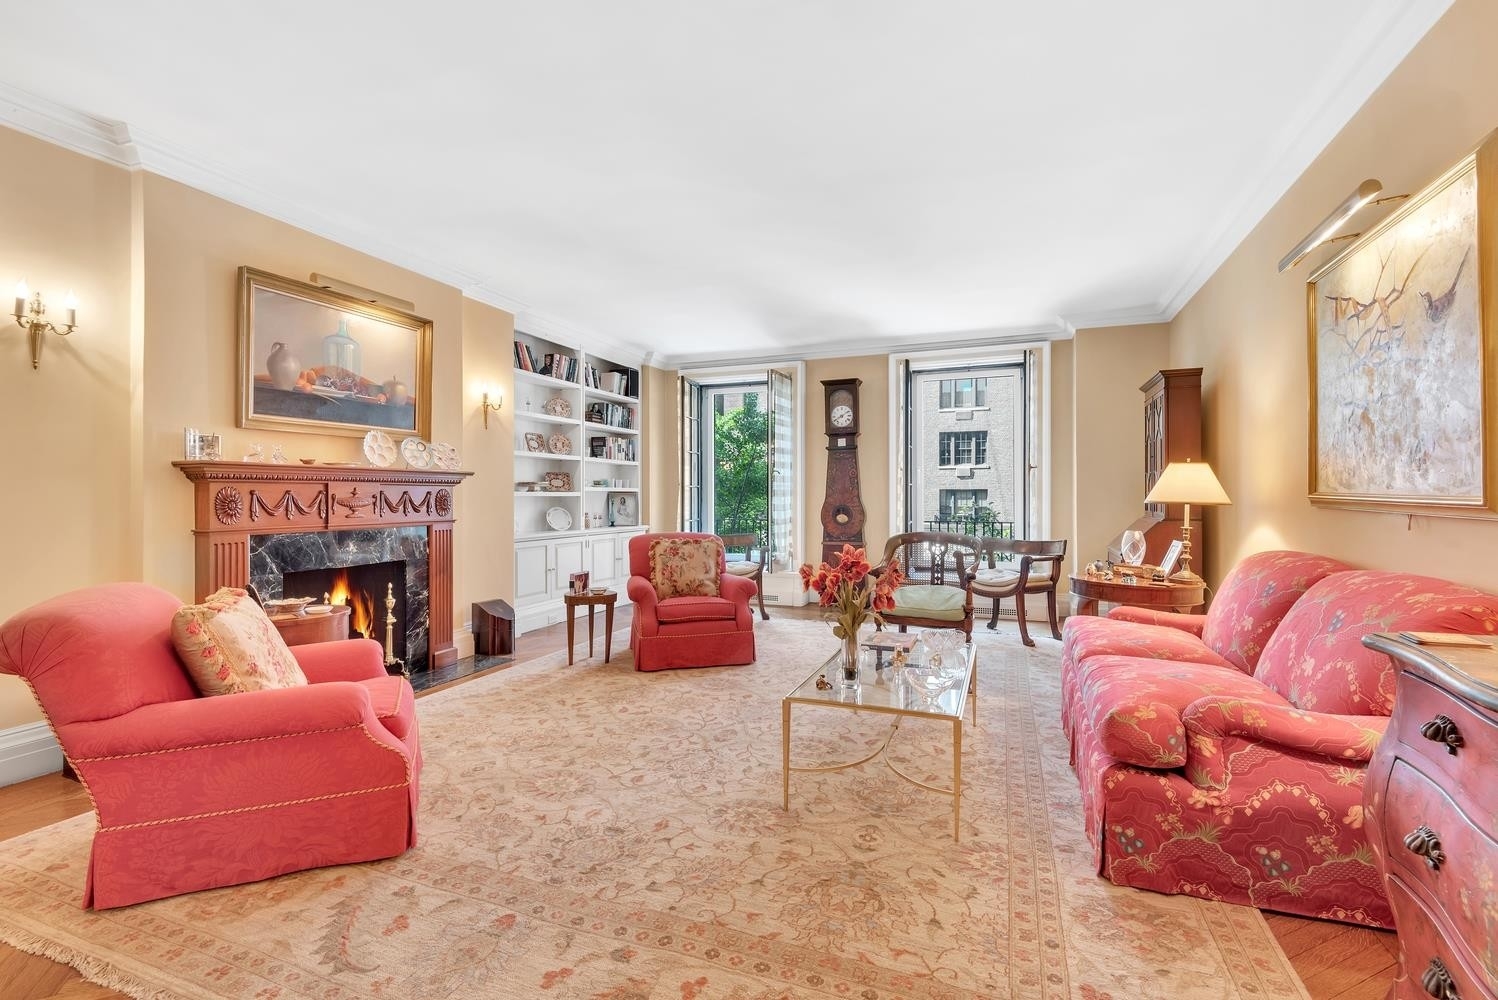 Co-op Properties for Sale at 447 E 57TH ST, 5A Sutton Place, New York, NY 10022